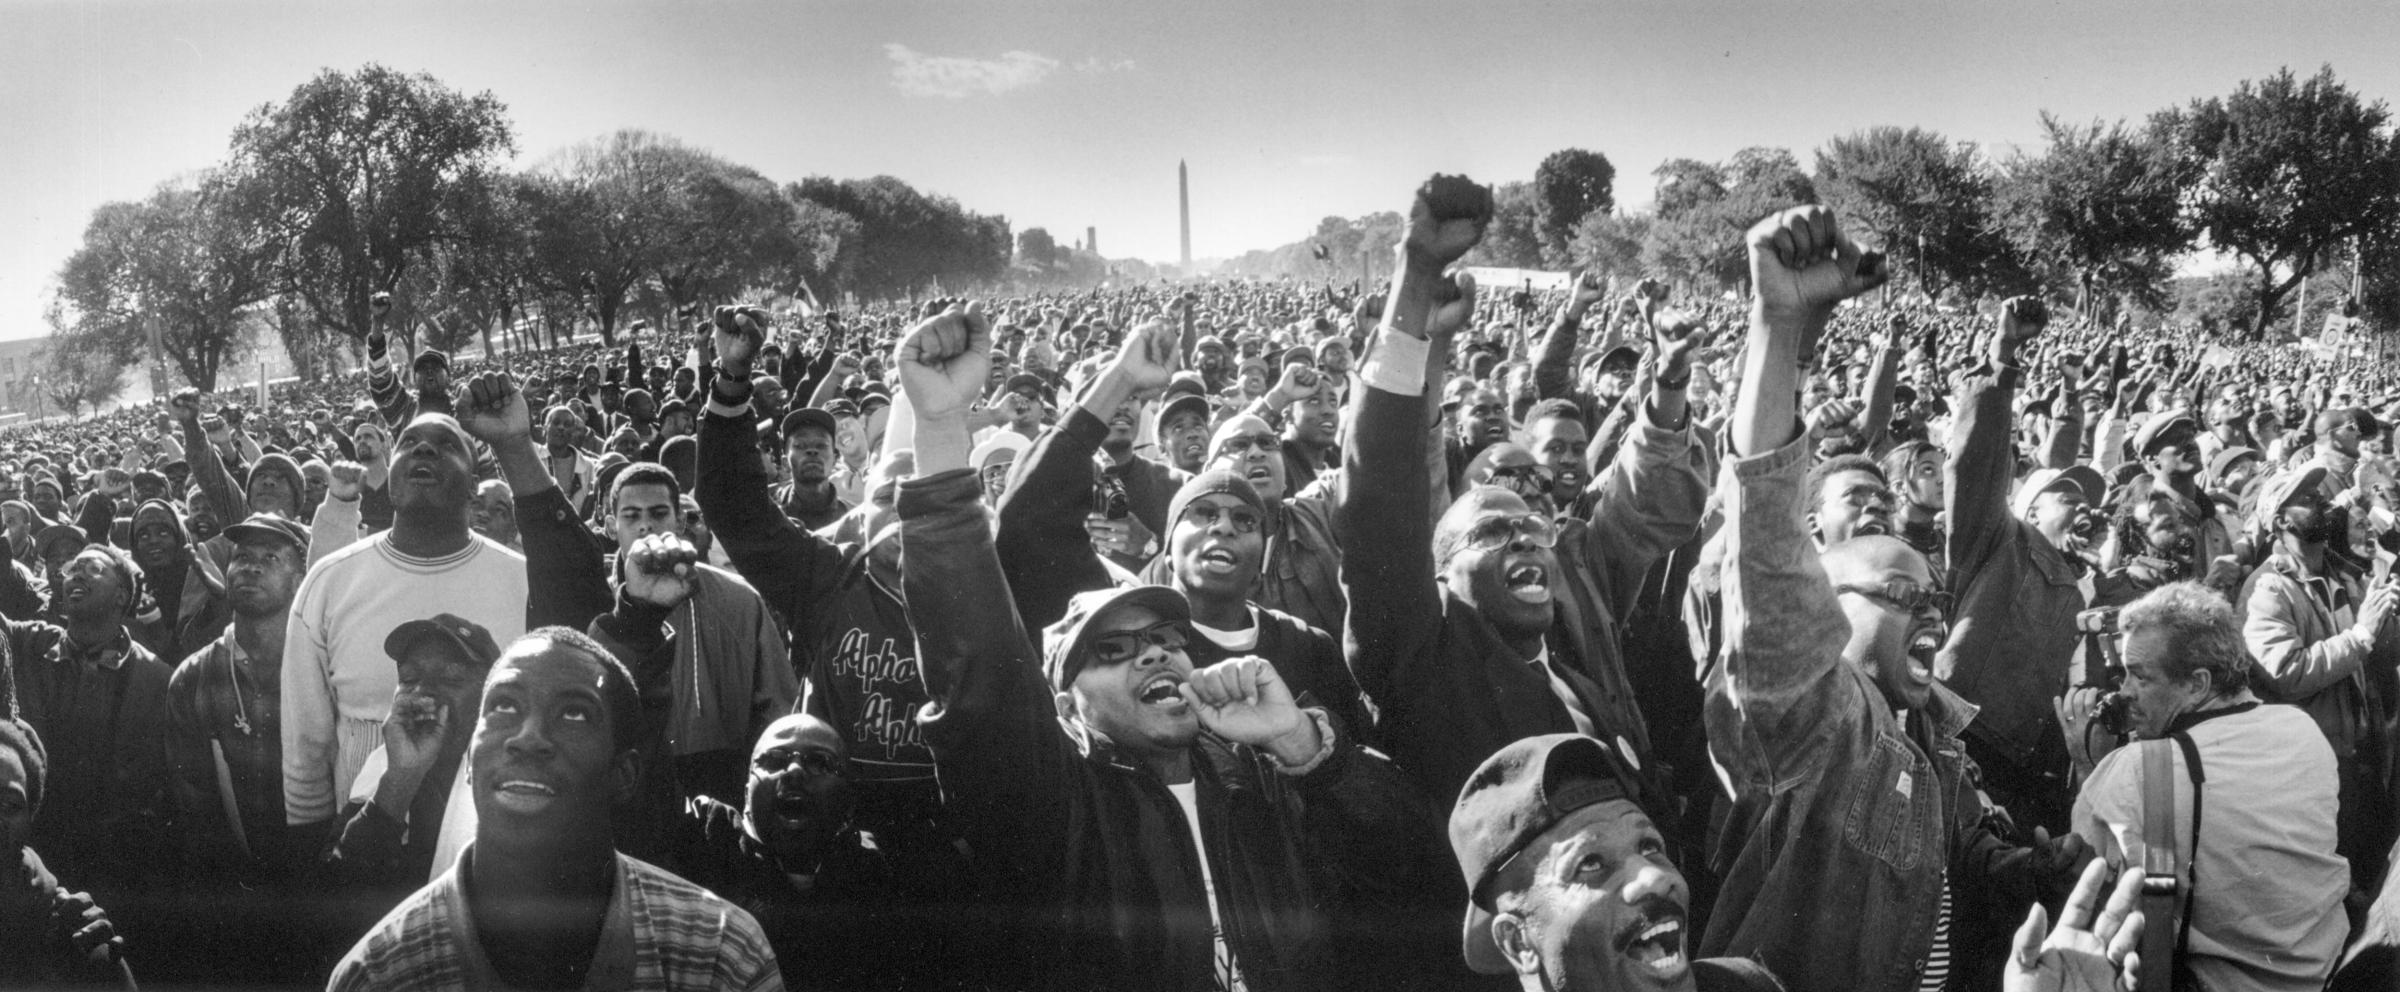 DC: City of Protests - The Million Man March: “That probably was one of...